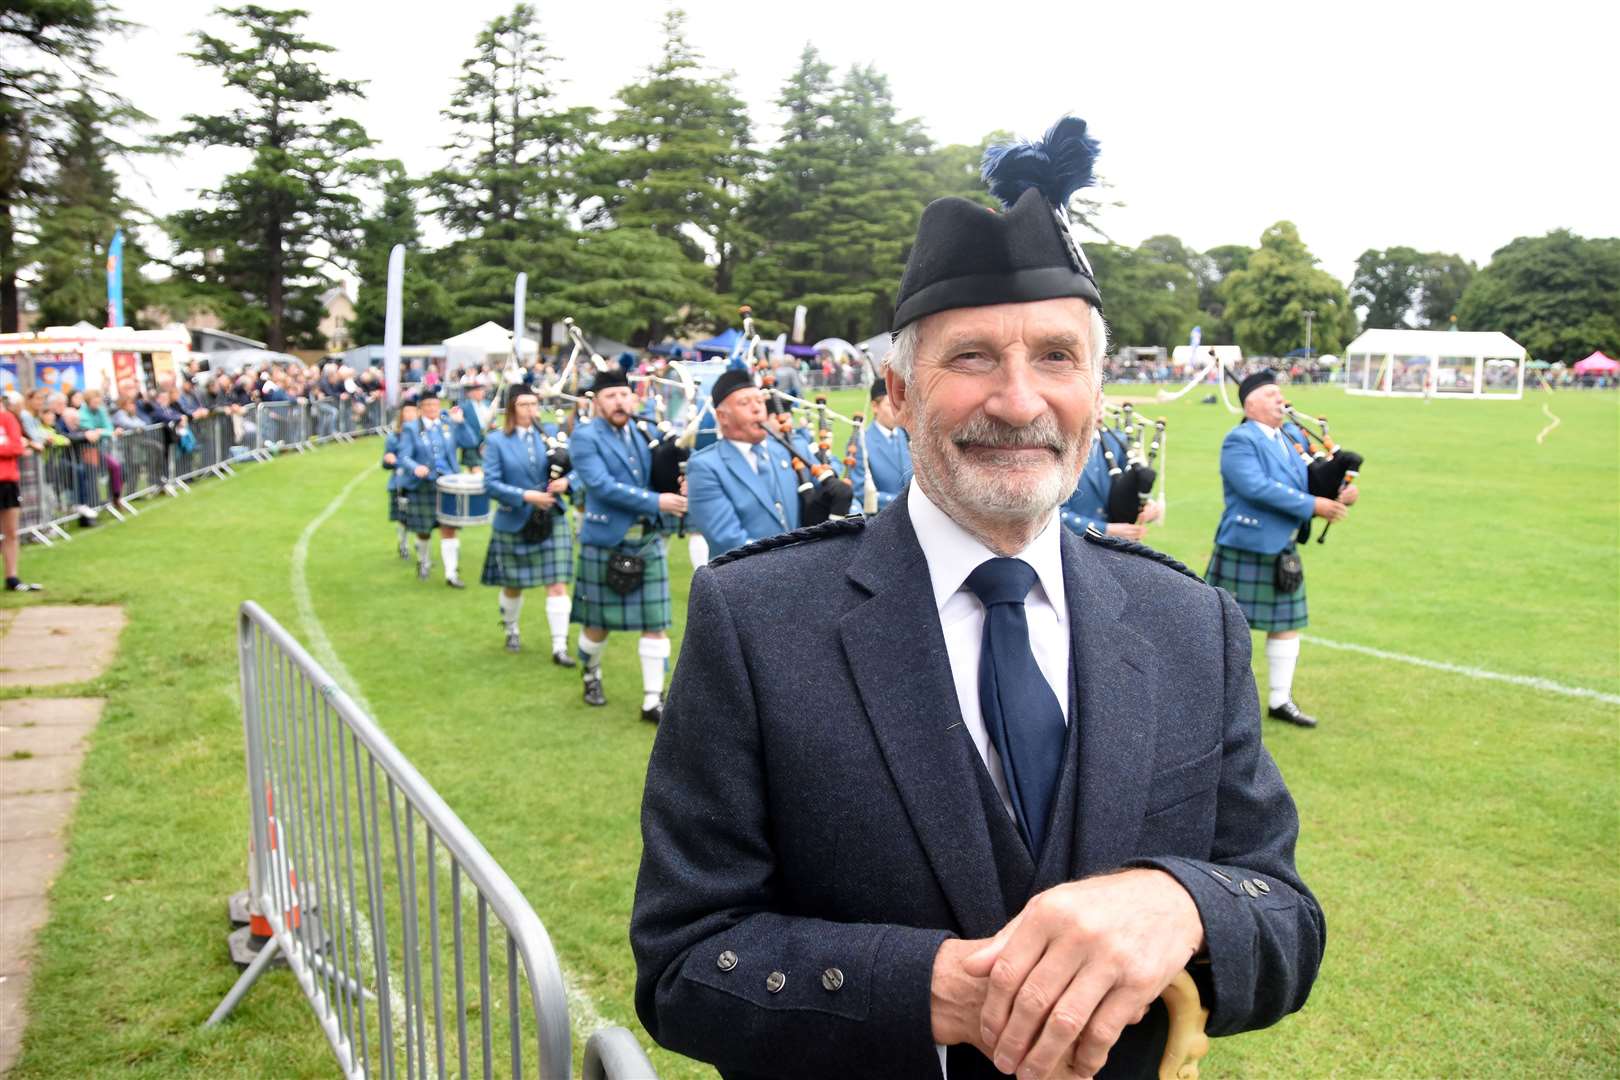 John was Chieftain of Forres Highland Games in 2019. Picture: Becky Saunderson